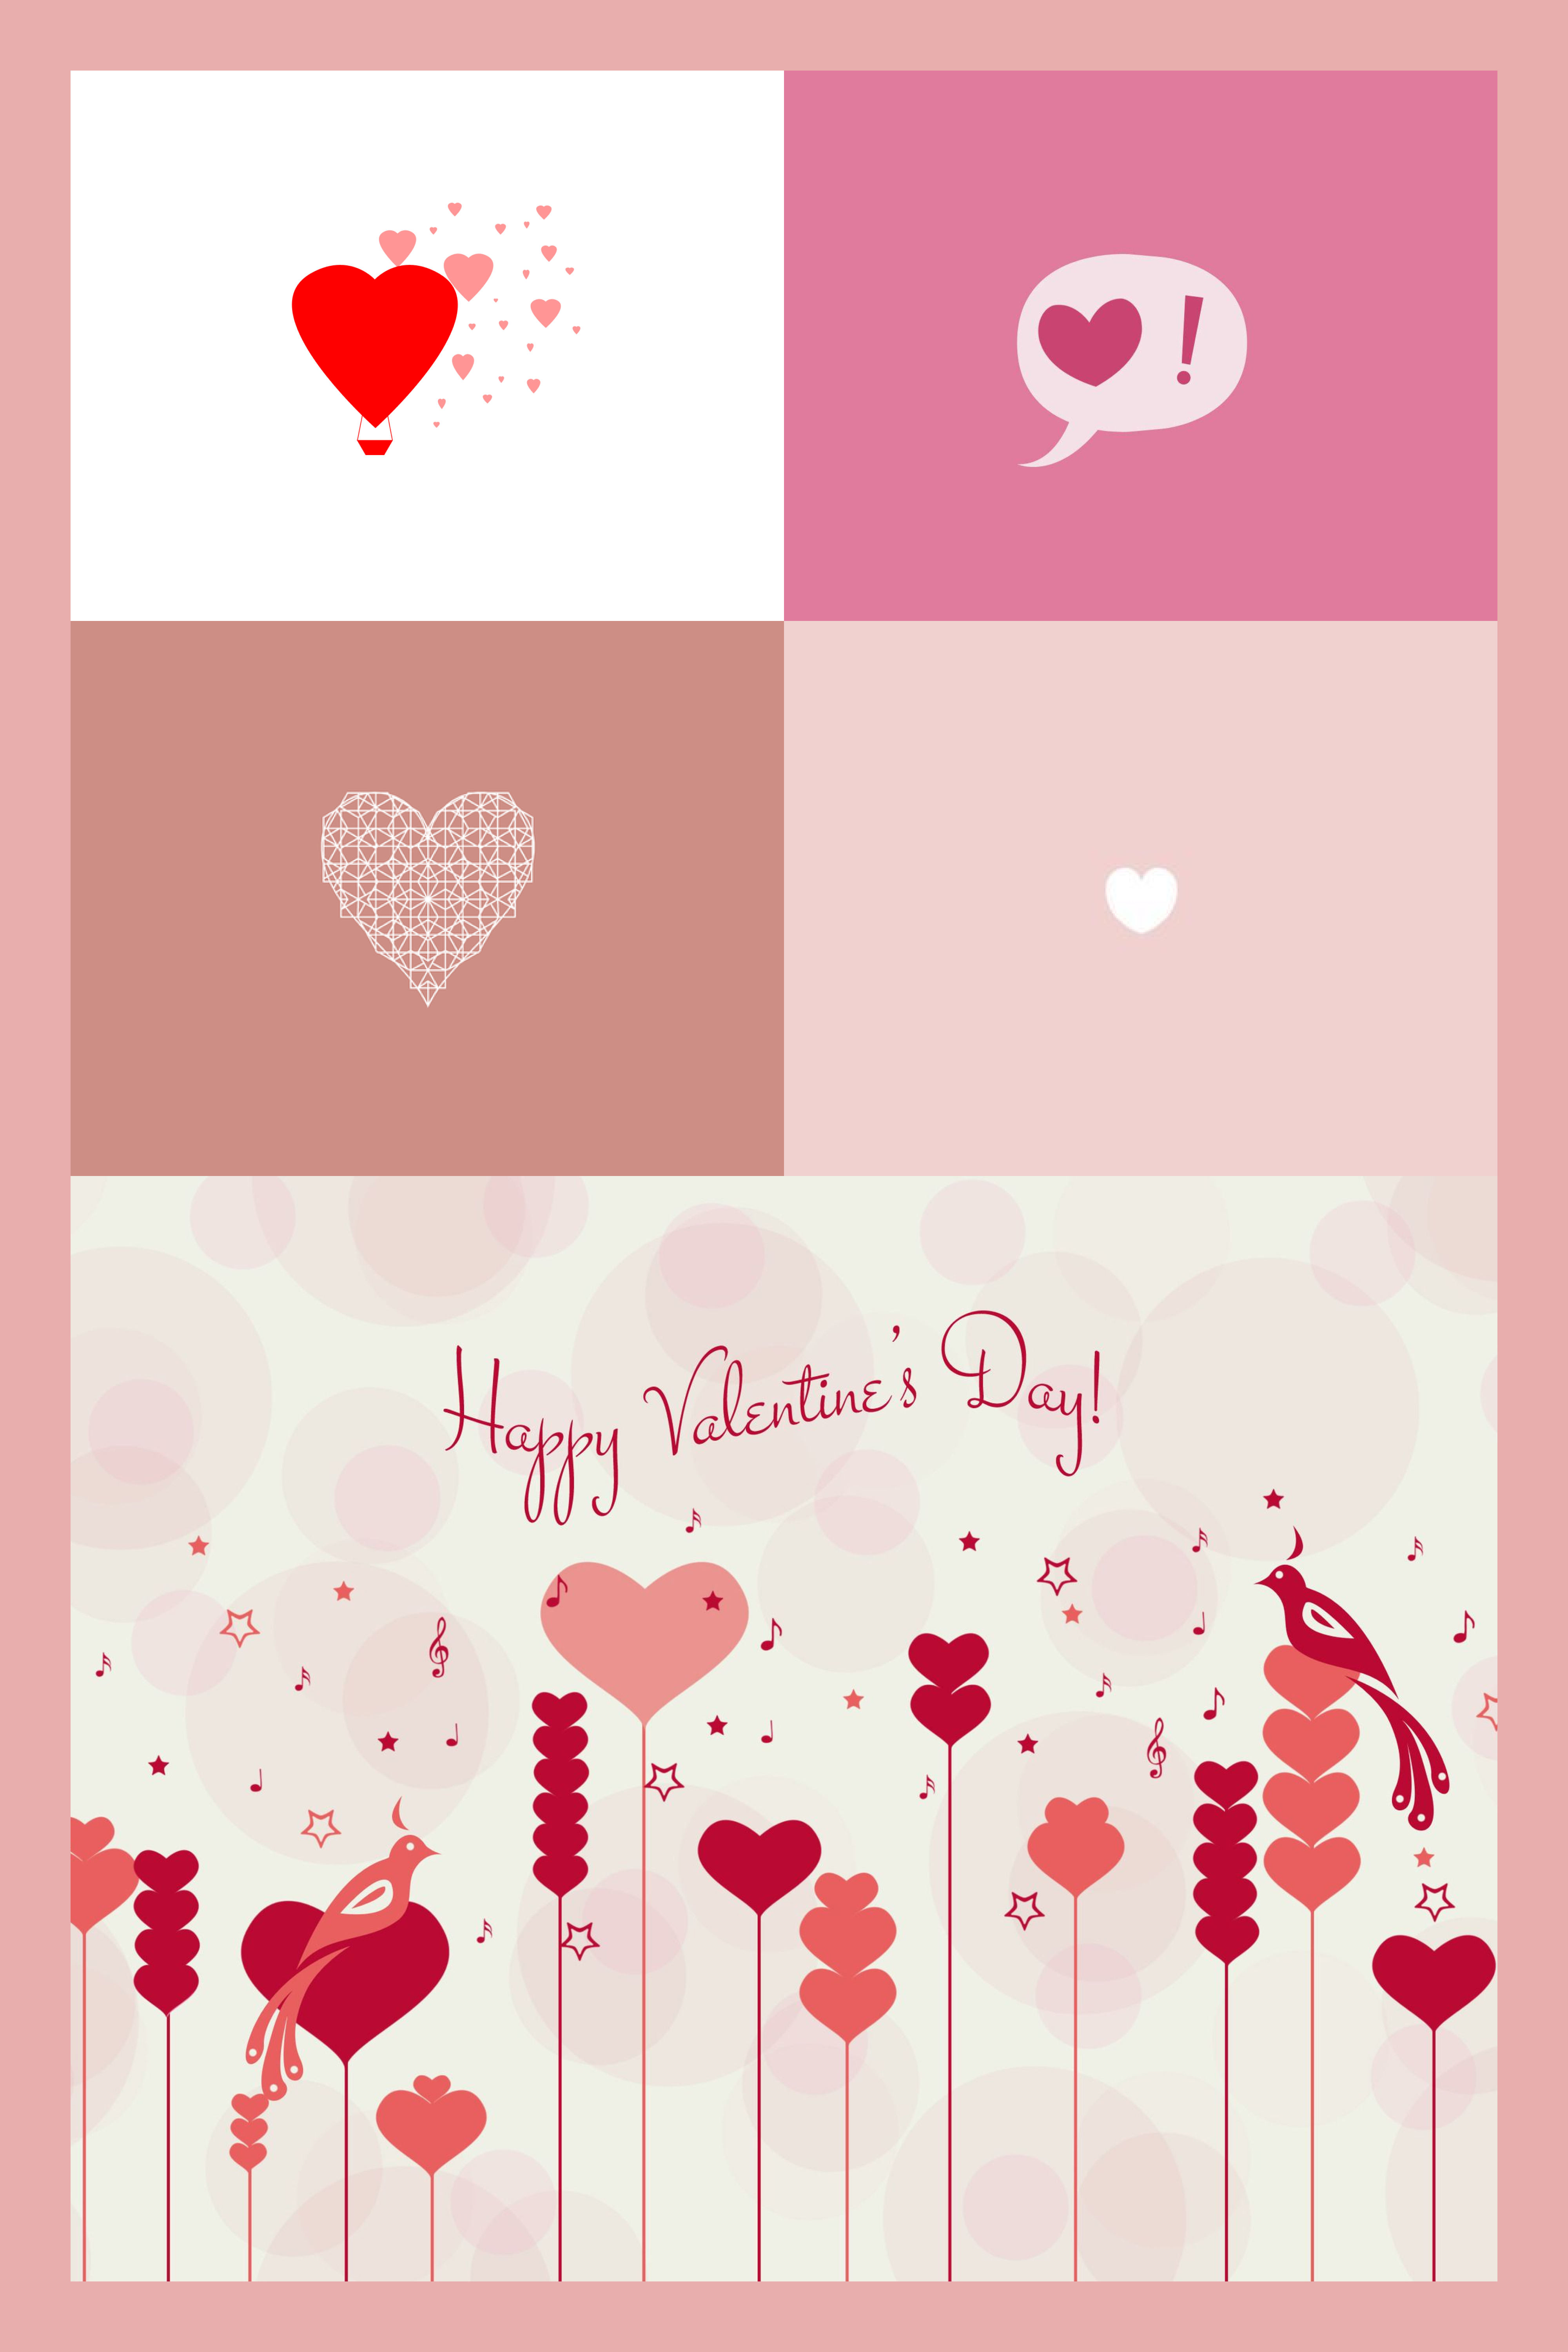 Collage of pictures with hearts on beige and pink backgrounds.